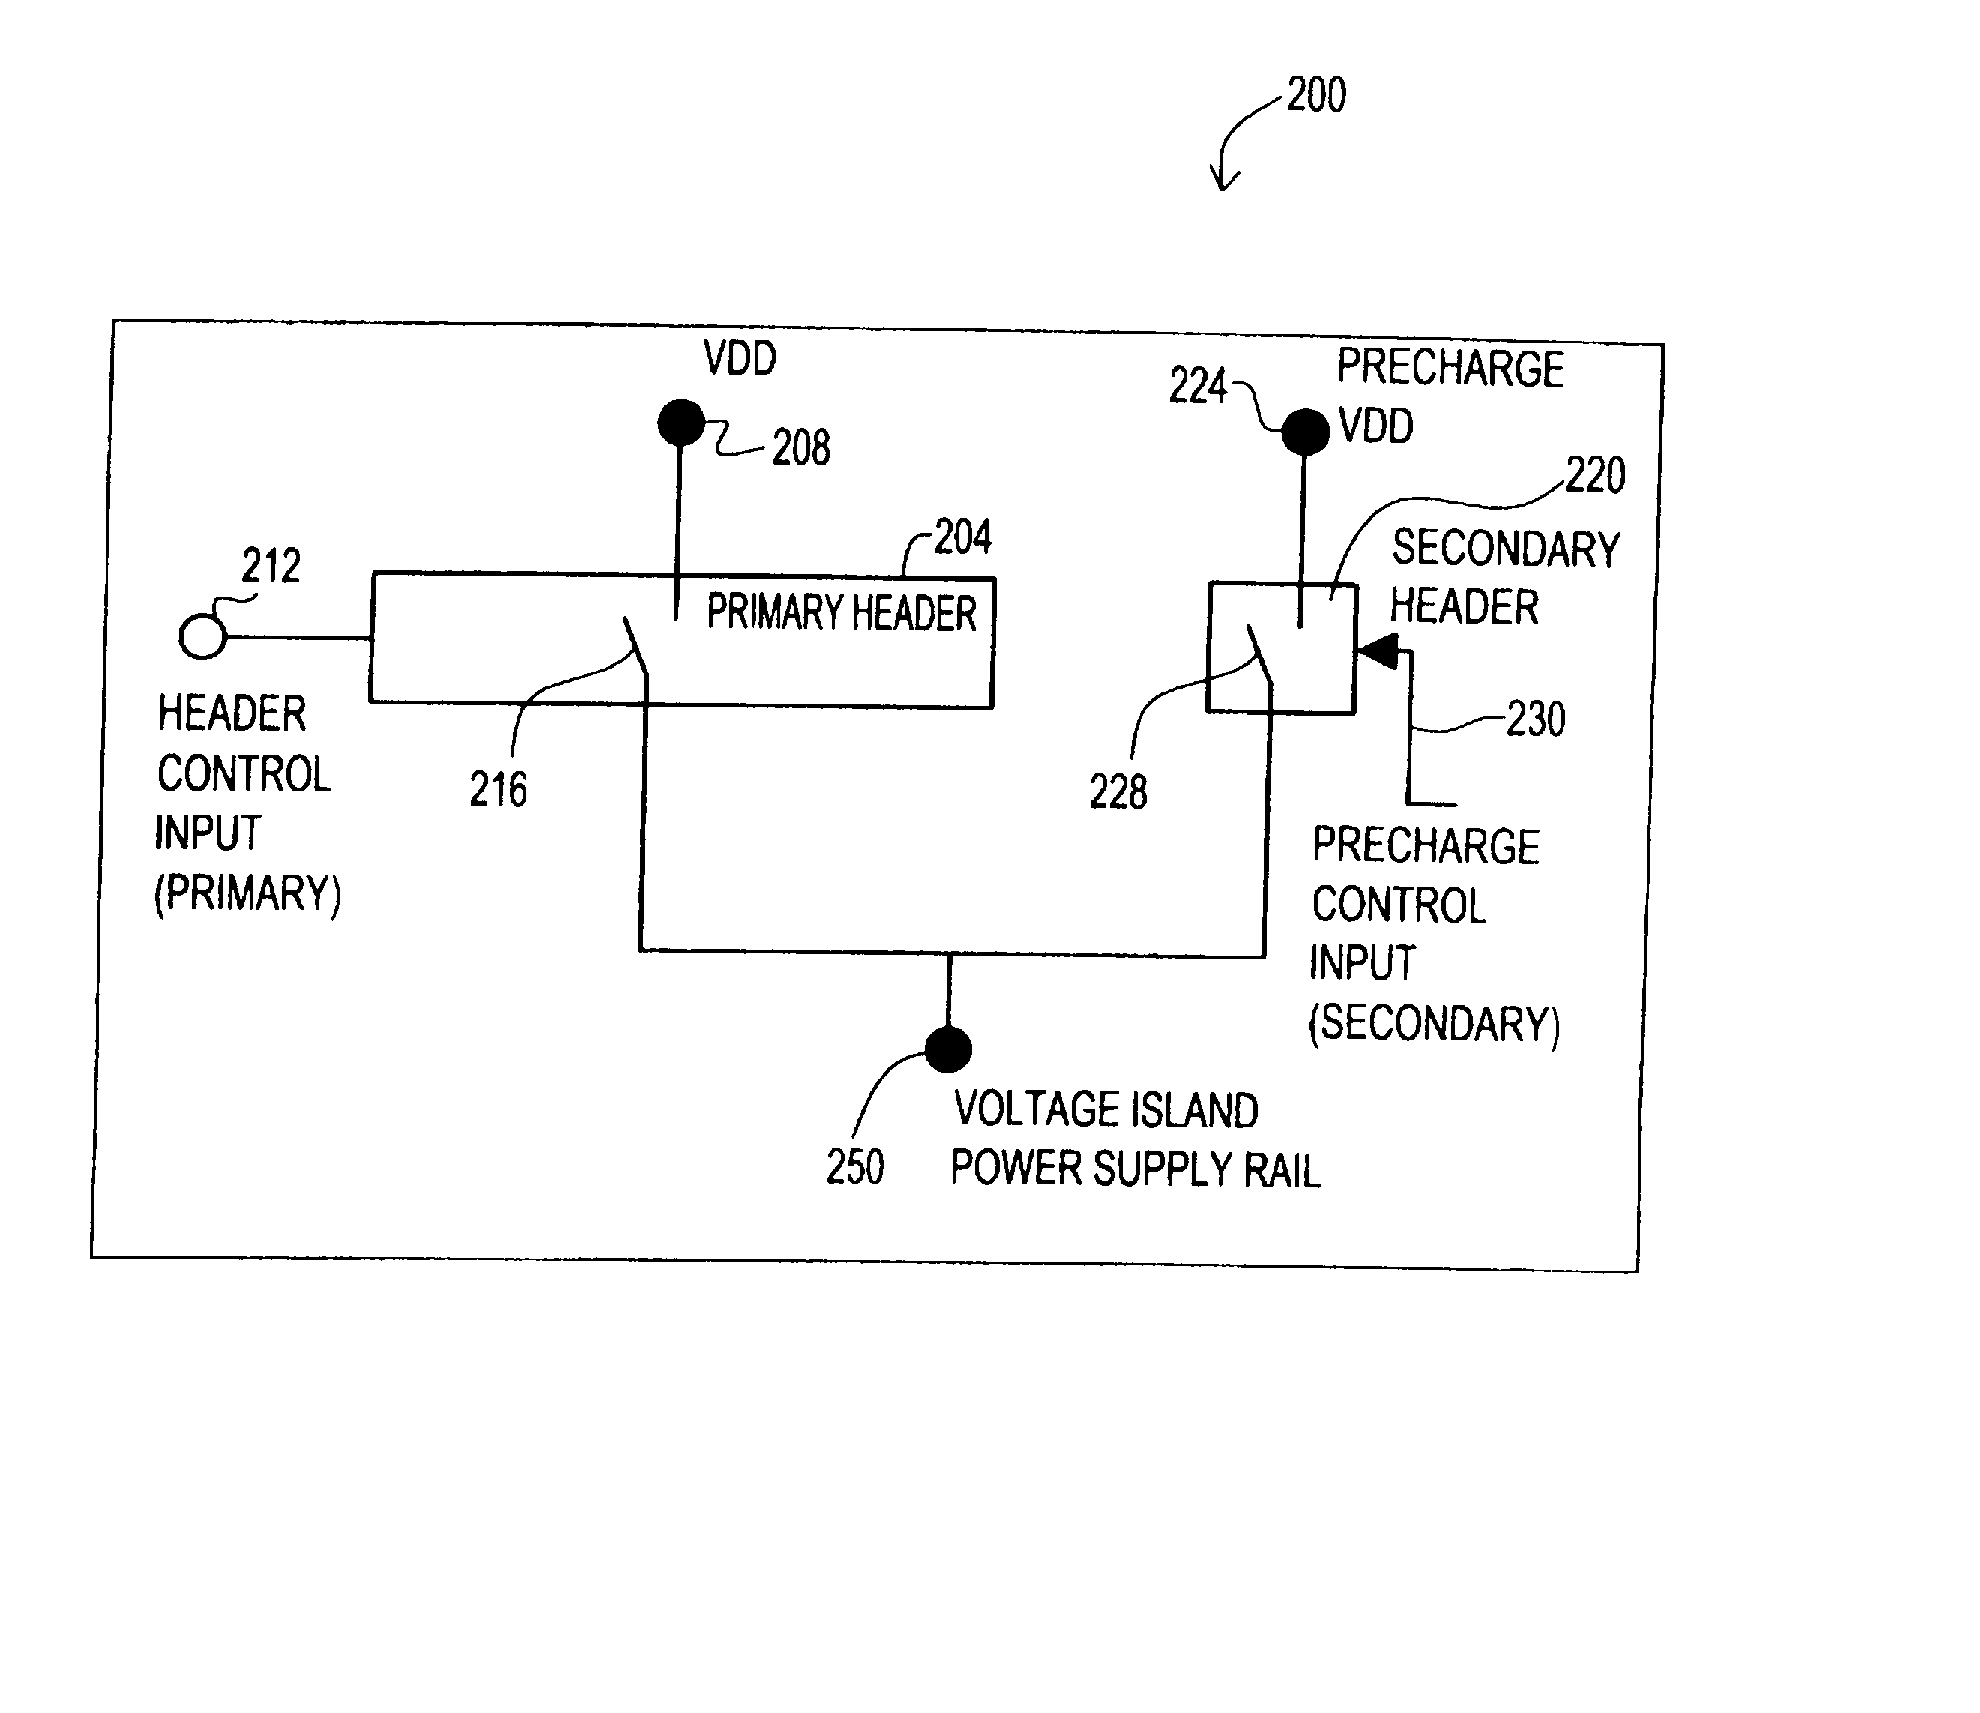 Design structure to eliminate step response power supply perturbation